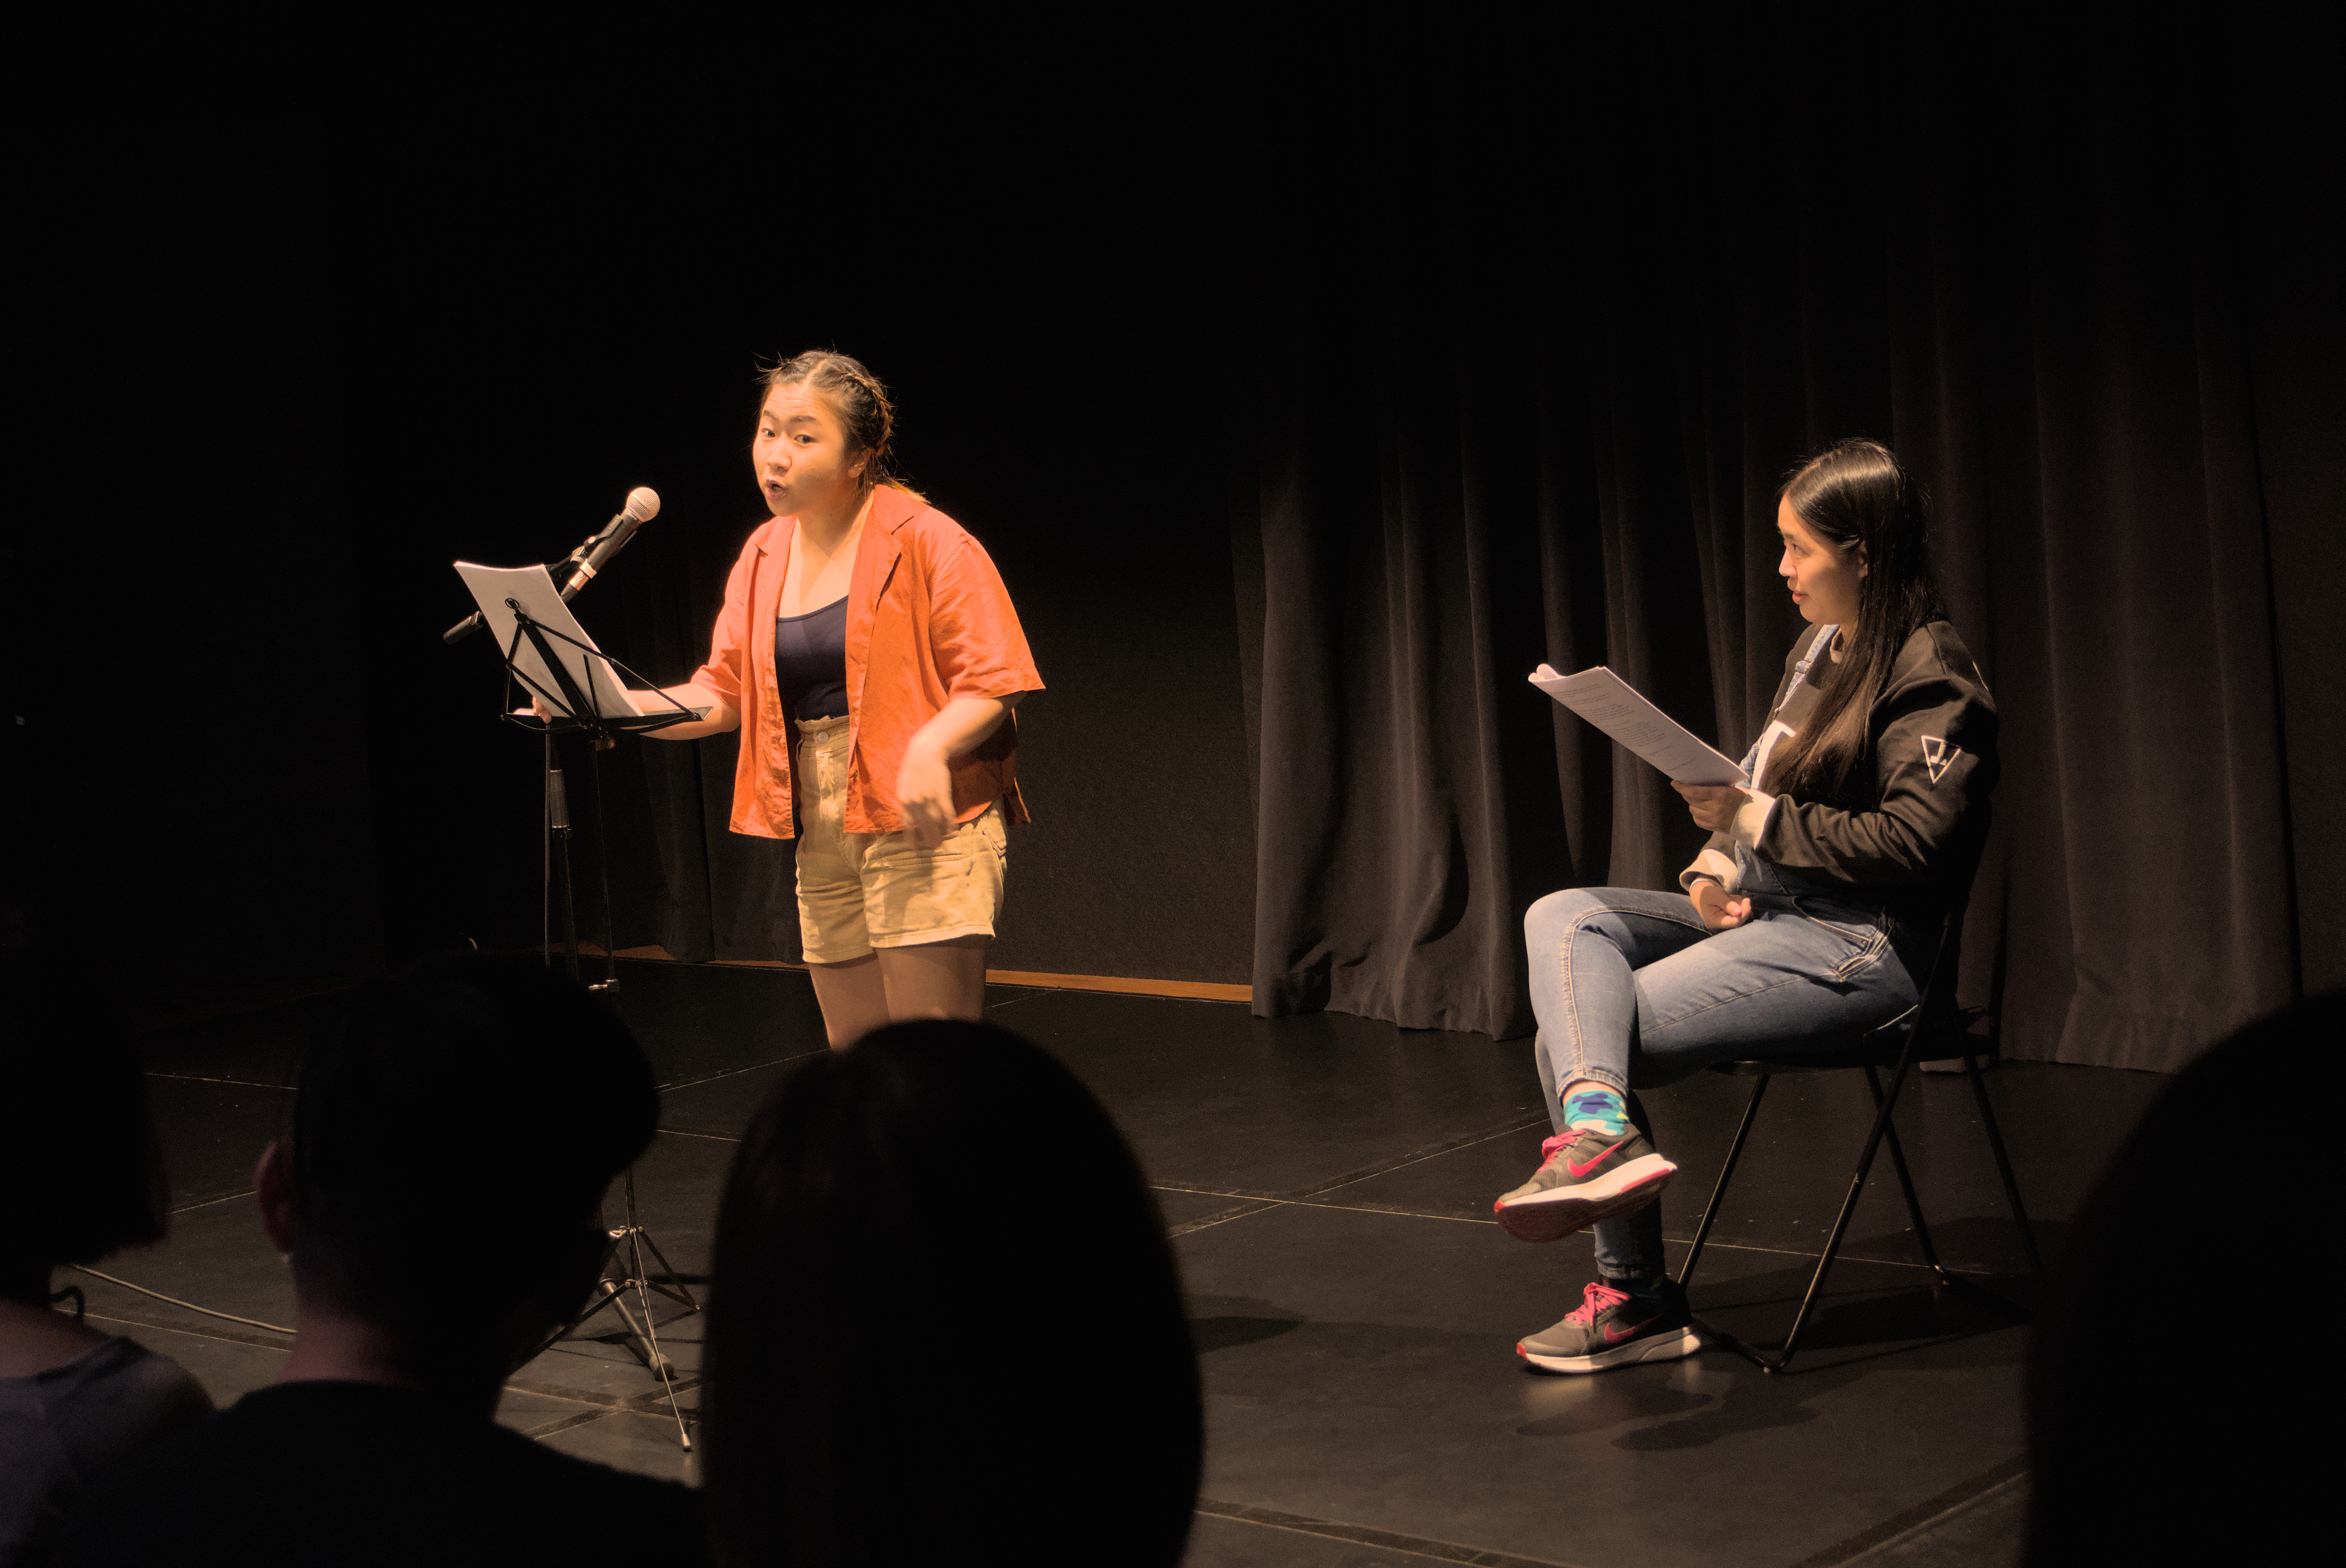 Cheryl Ho stands in front of a microphone and performs, while Cheryl Tan is seated next to her reading from a script.